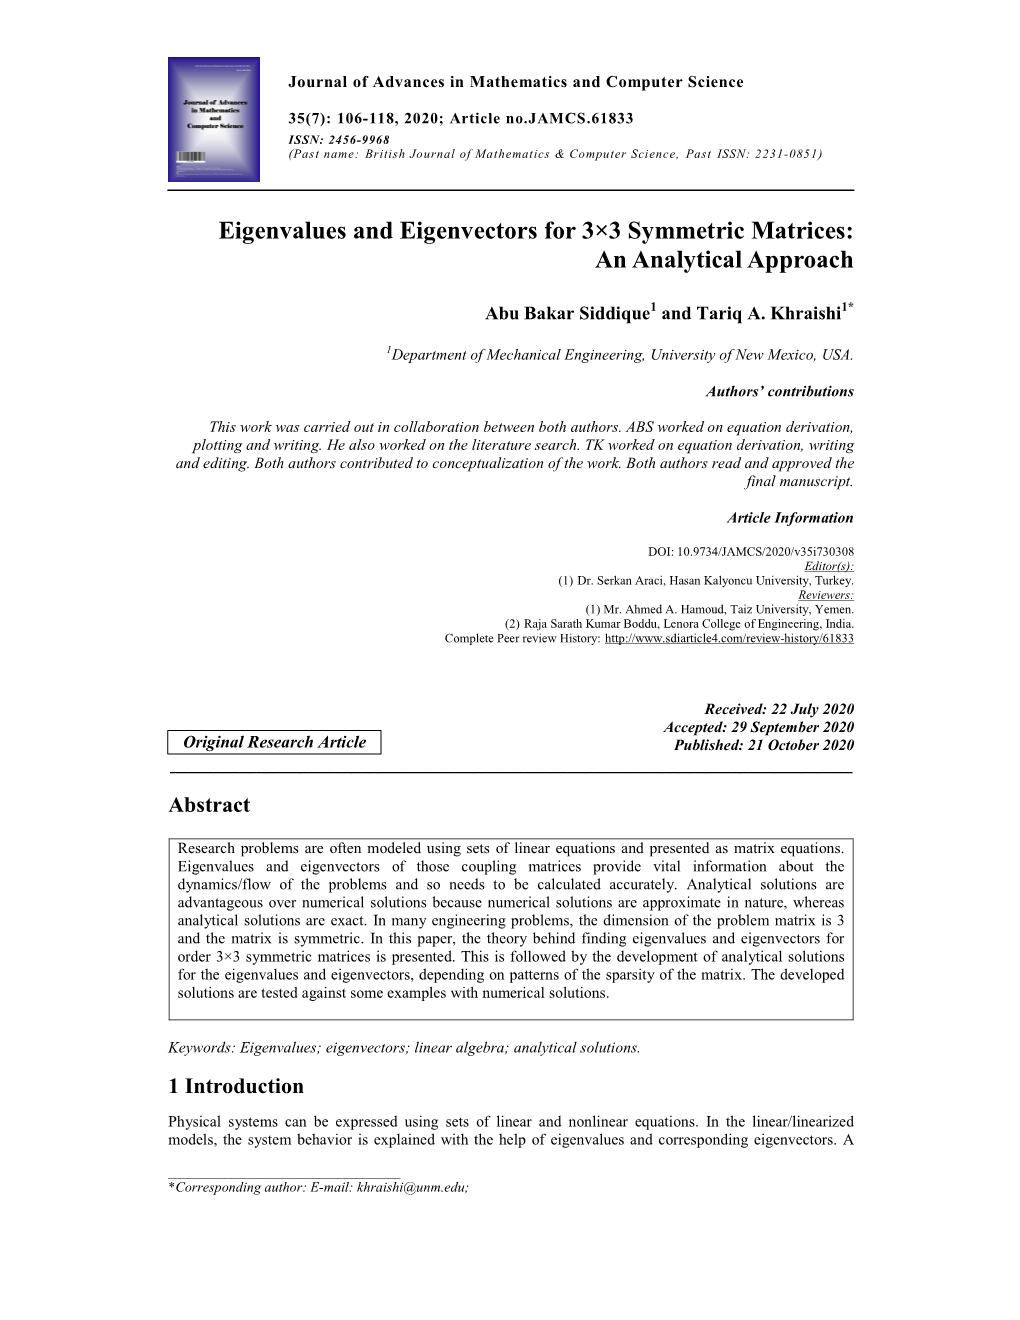 Eigenvalues and Eigenvectors for 3×3 Symmetric Matrices: an Analytical Approach